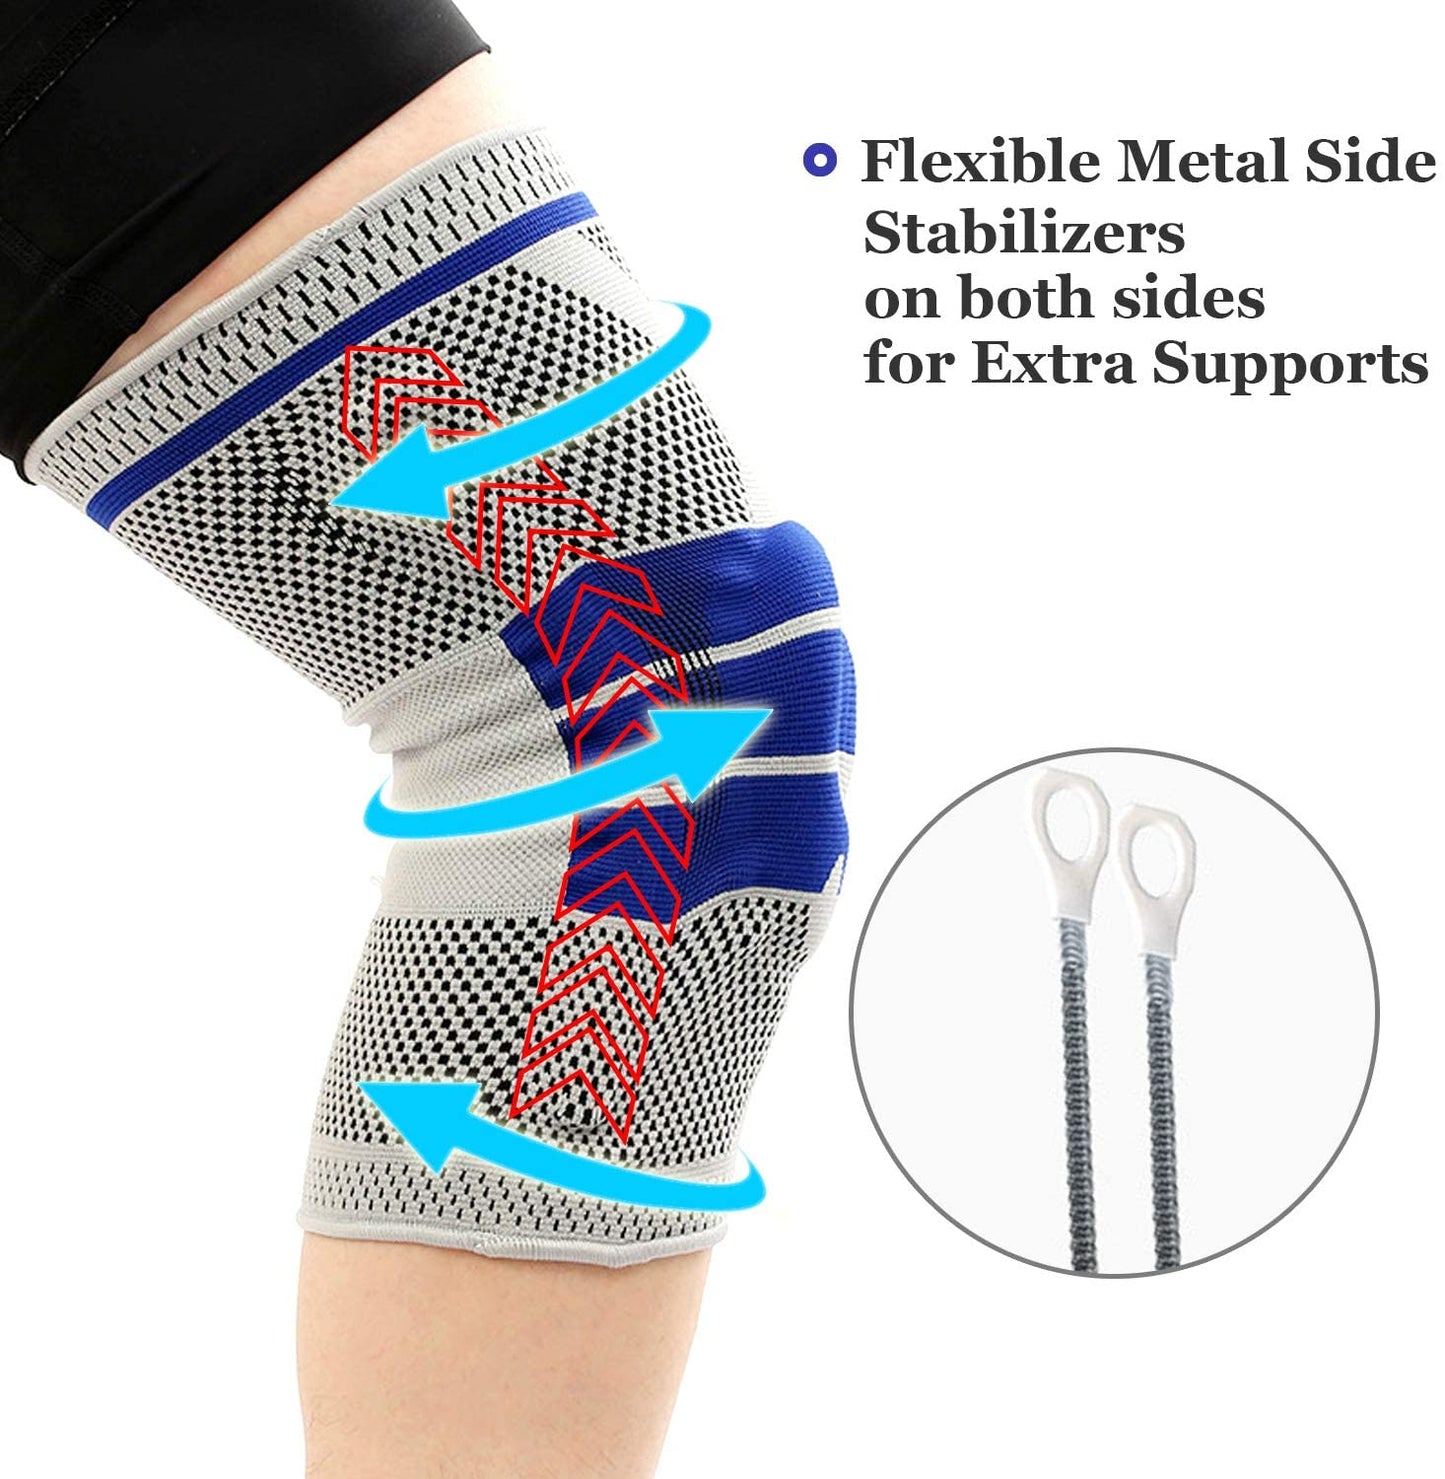 Professional Knee Brace Compression Sleeve - Best Knee Braces for Men Women, Knee Support Protector for Running, Meniscus Tear, Arthritis, Joint Pain Relief, Sports Injury Recovery